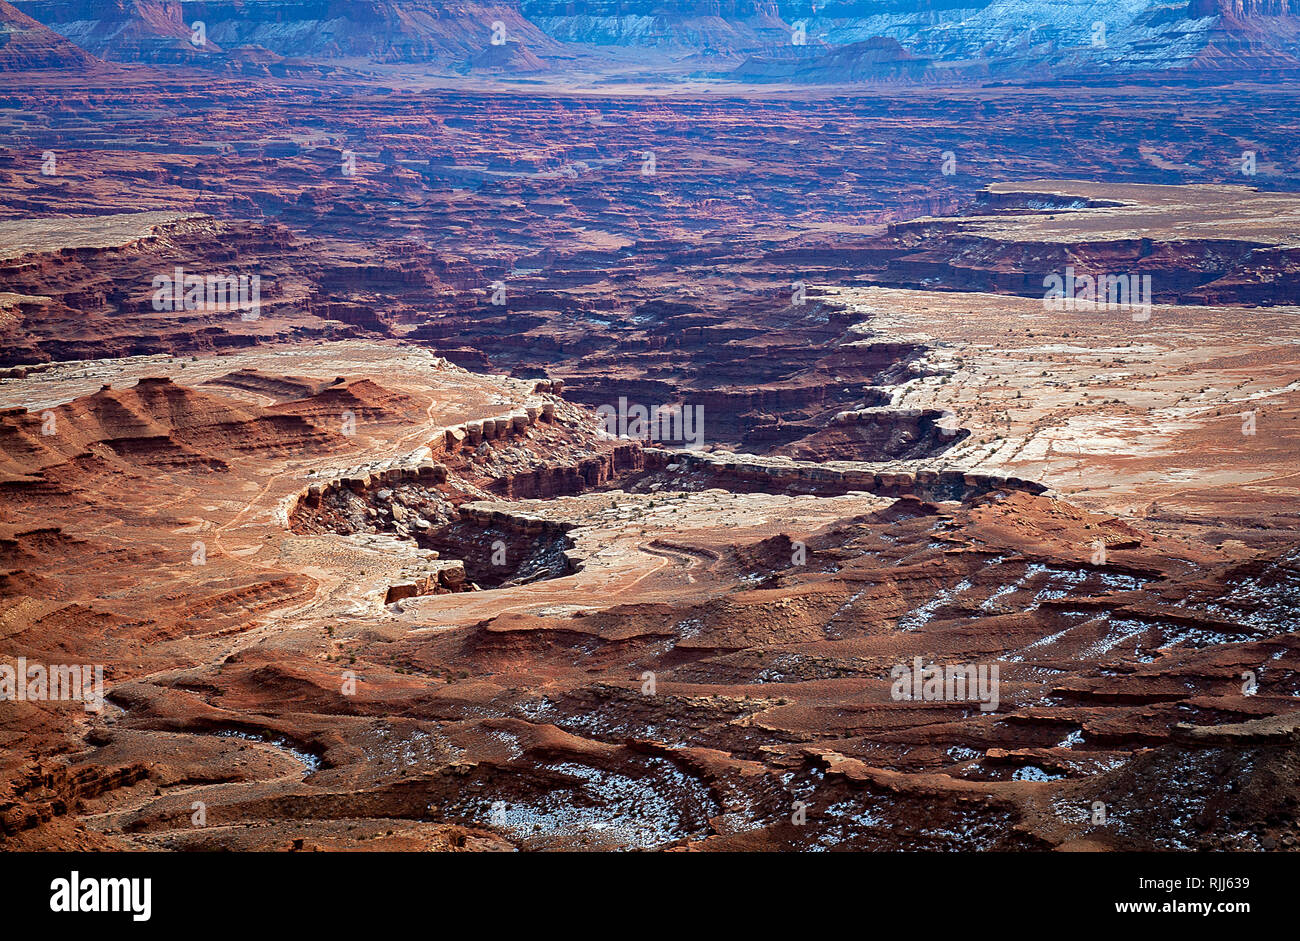 January 2019: Deep canyons carved by the Colorado River make up the White Rim of Canyonlands National Park, Moab, Utah. Stock Photo